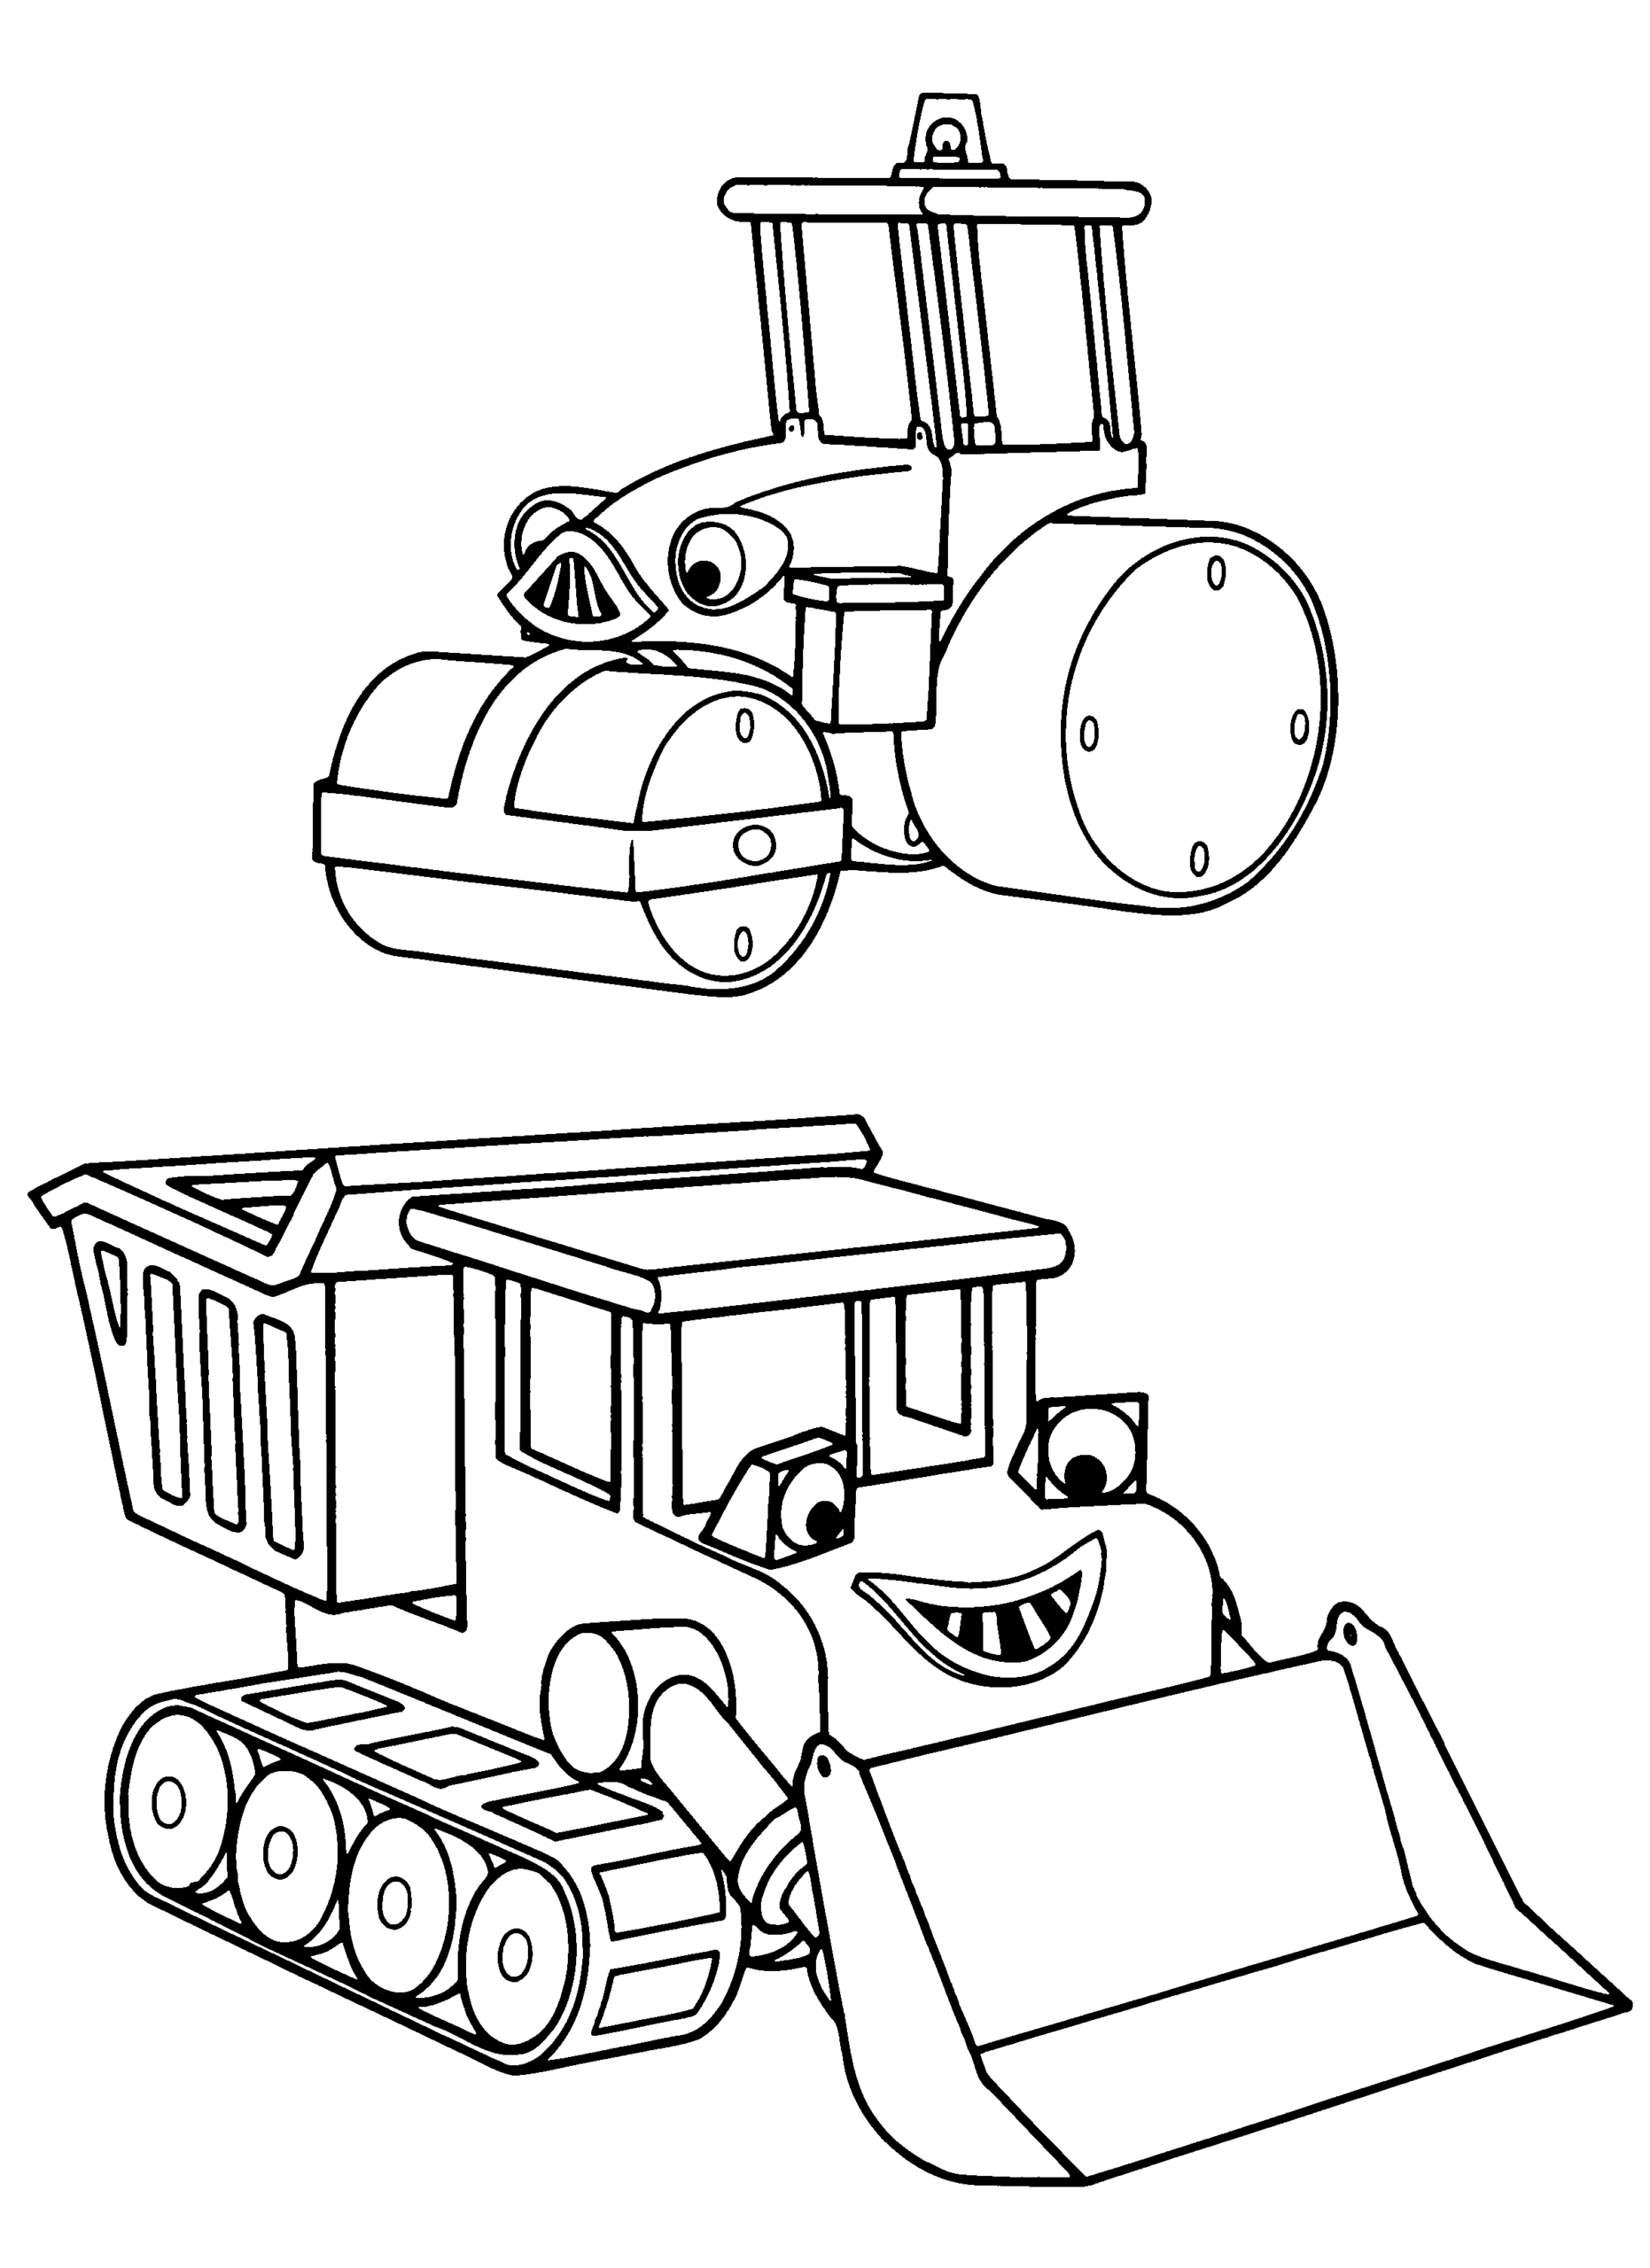 Bob the Builder Coloring Pages TV Film bob the builder 44 Printable 2020 01063 Coloring4free